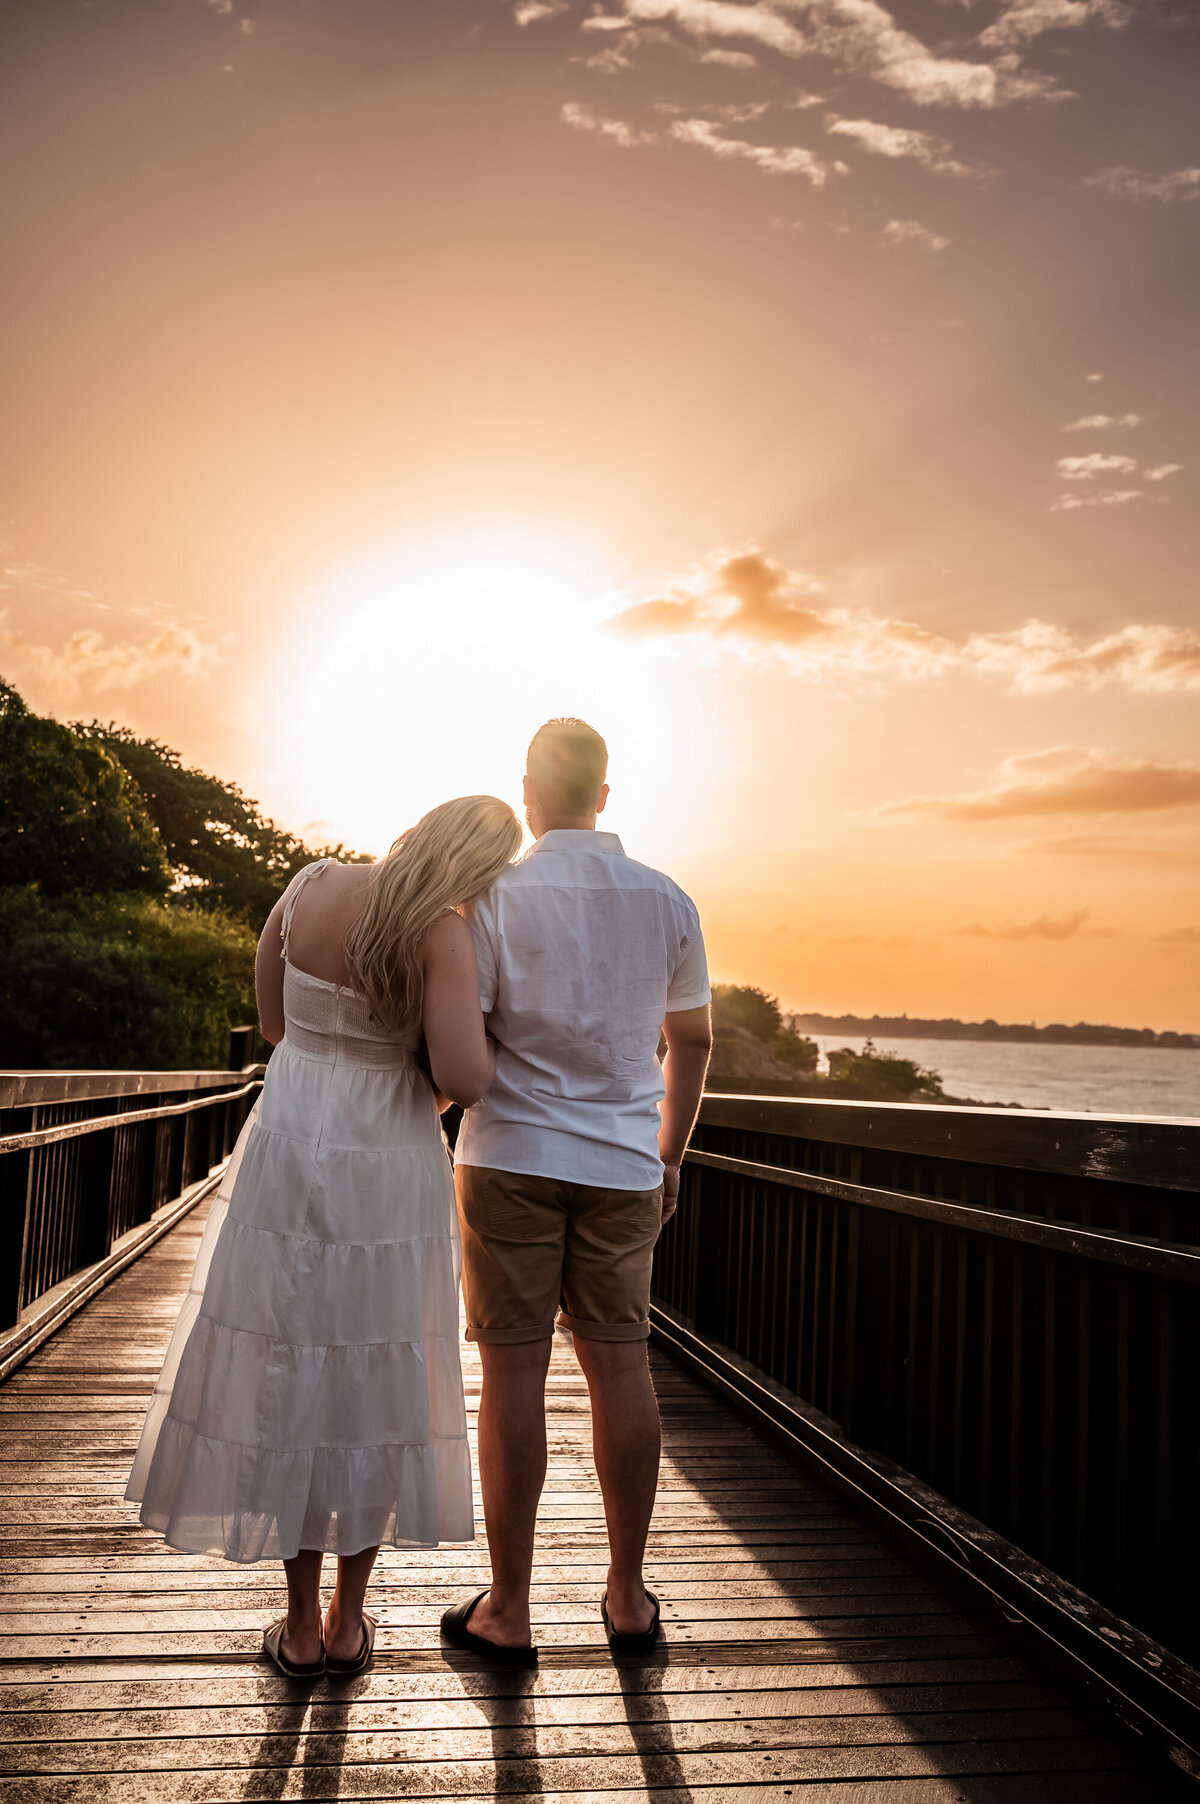 man and woman embracing on a boardwalk while watching the sunset - Townsville Engagement Photography by Jamie Simmons